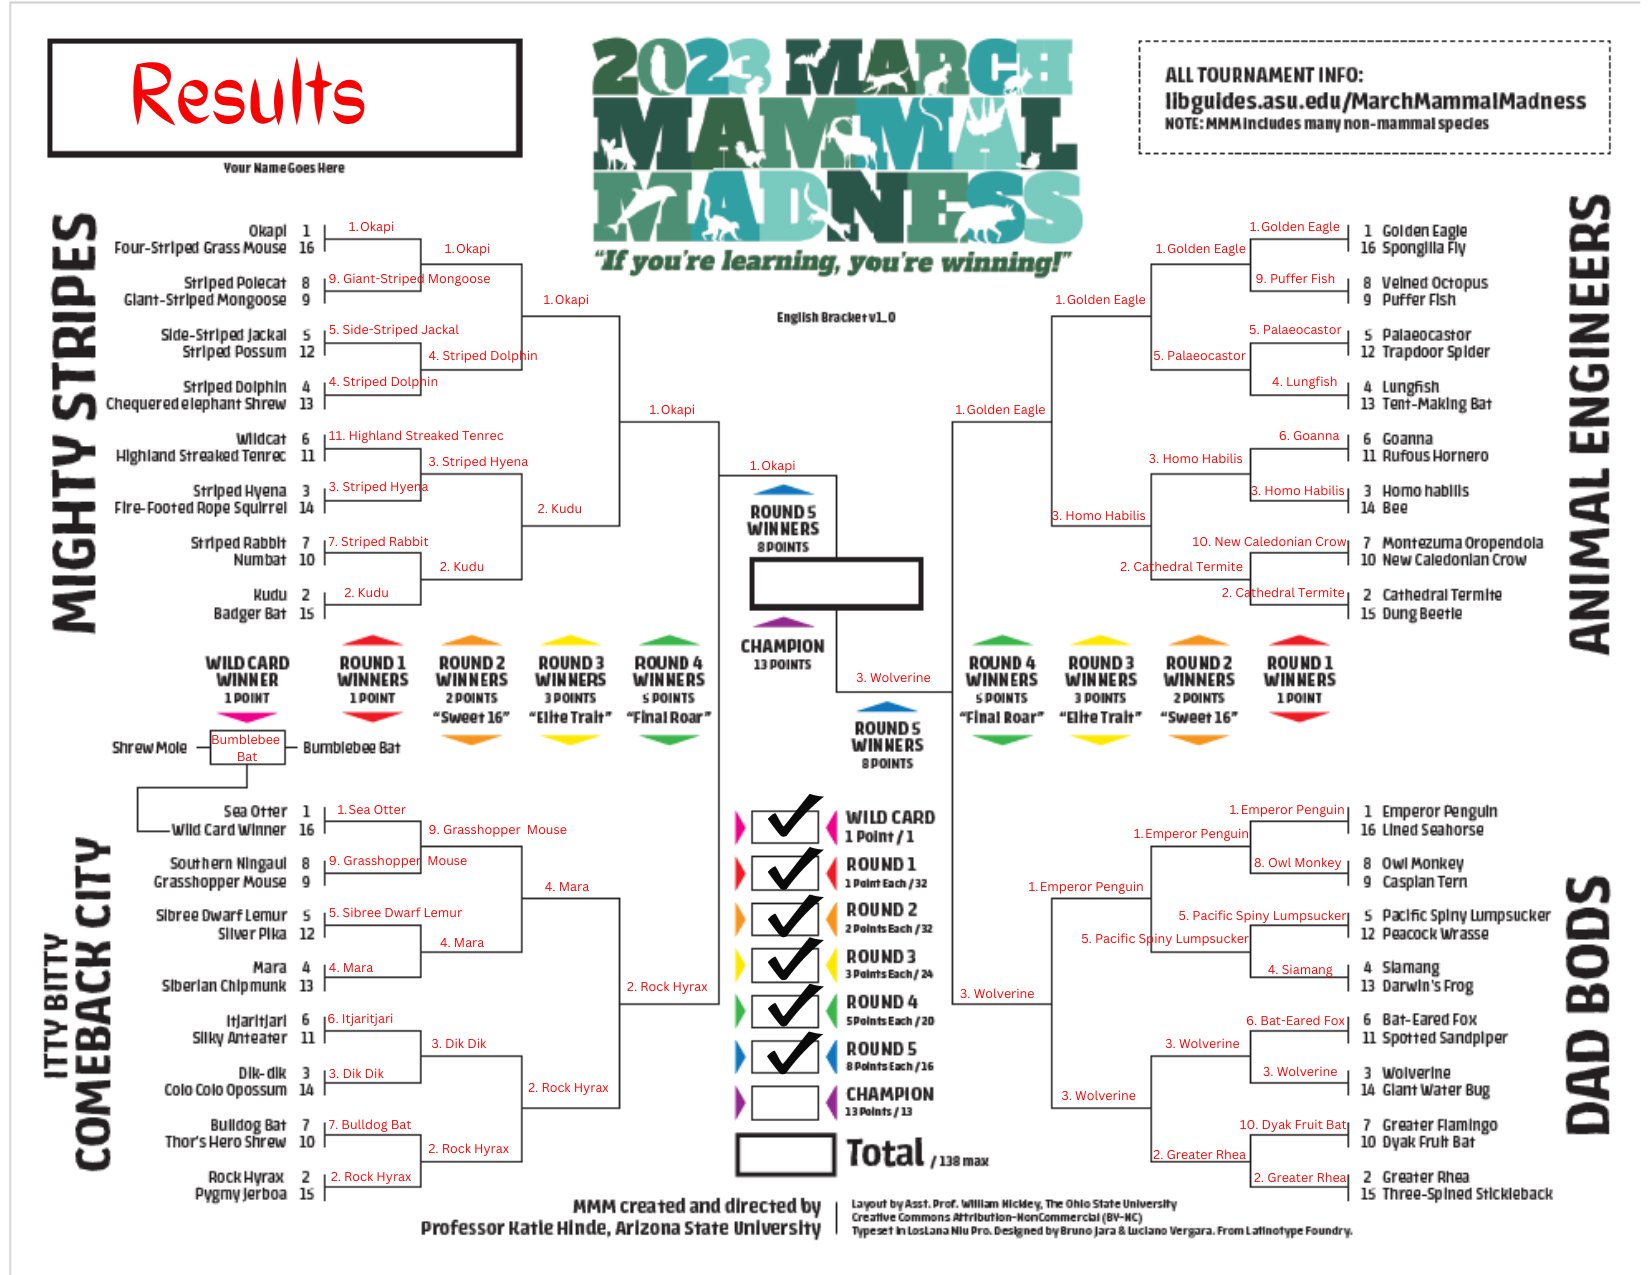 March Mammal Madness on Twitter "Winners of the FINAL ROAR OKAPI and